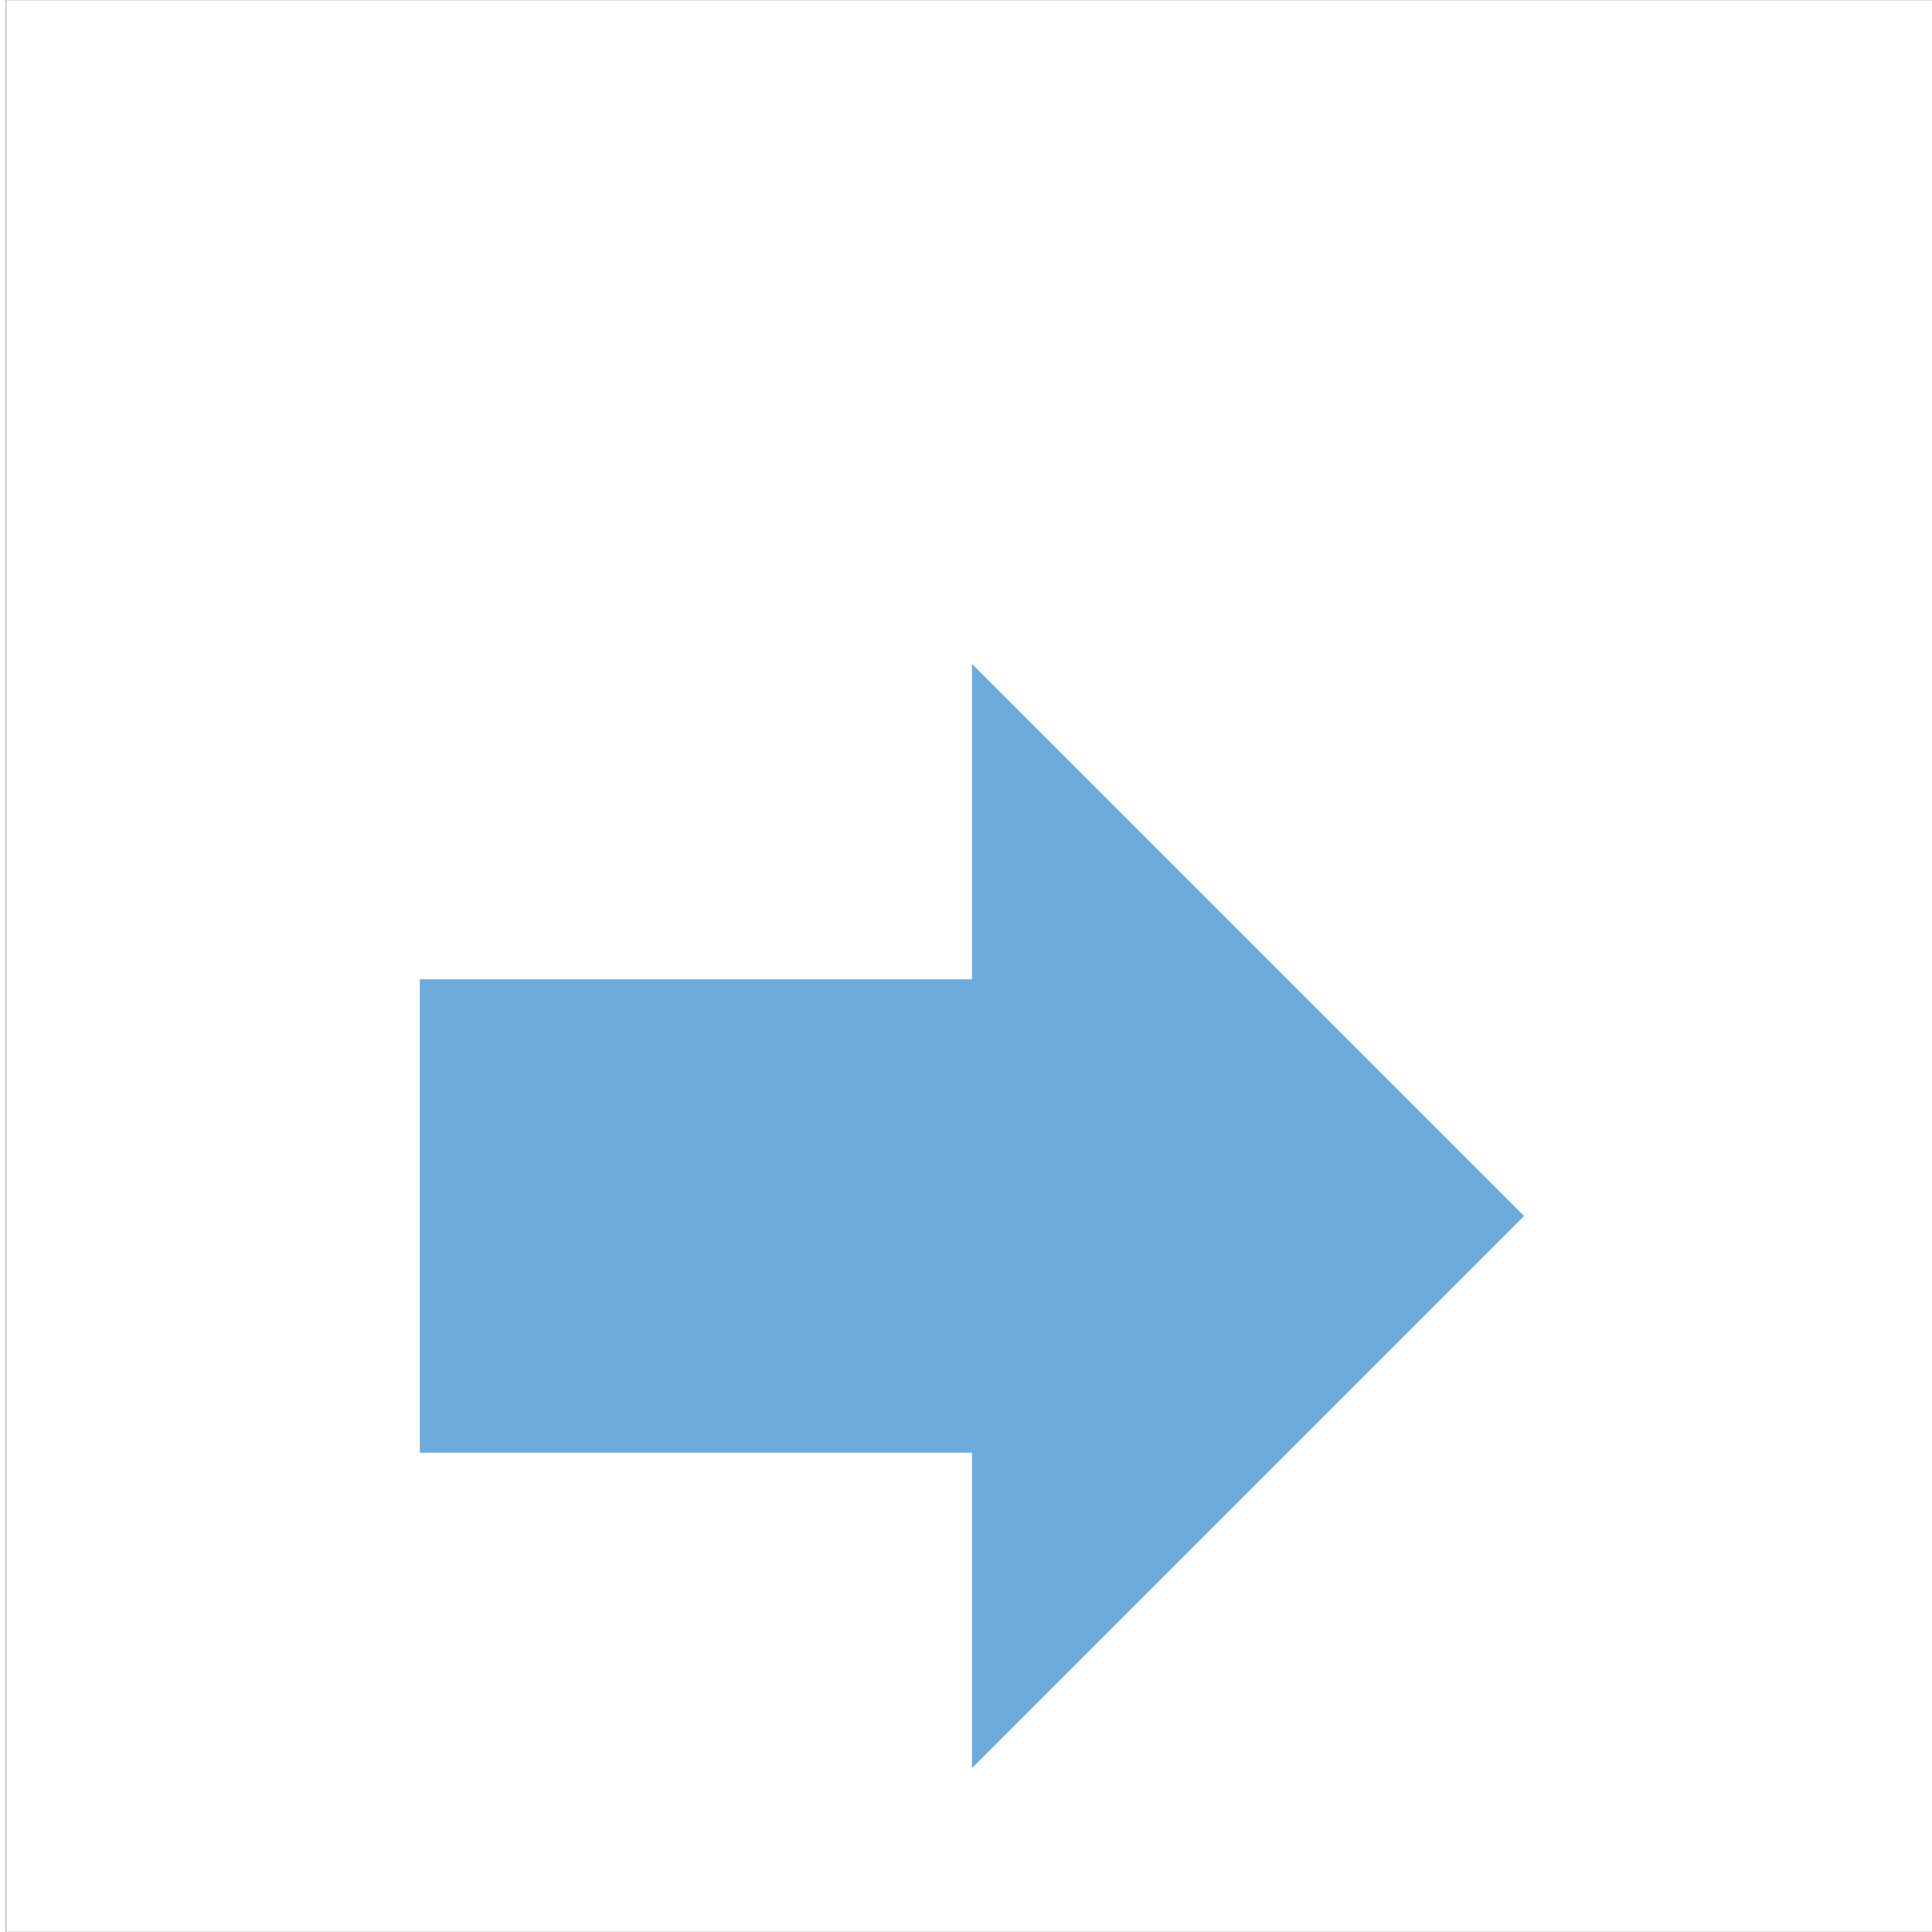 arrow pointing to the right